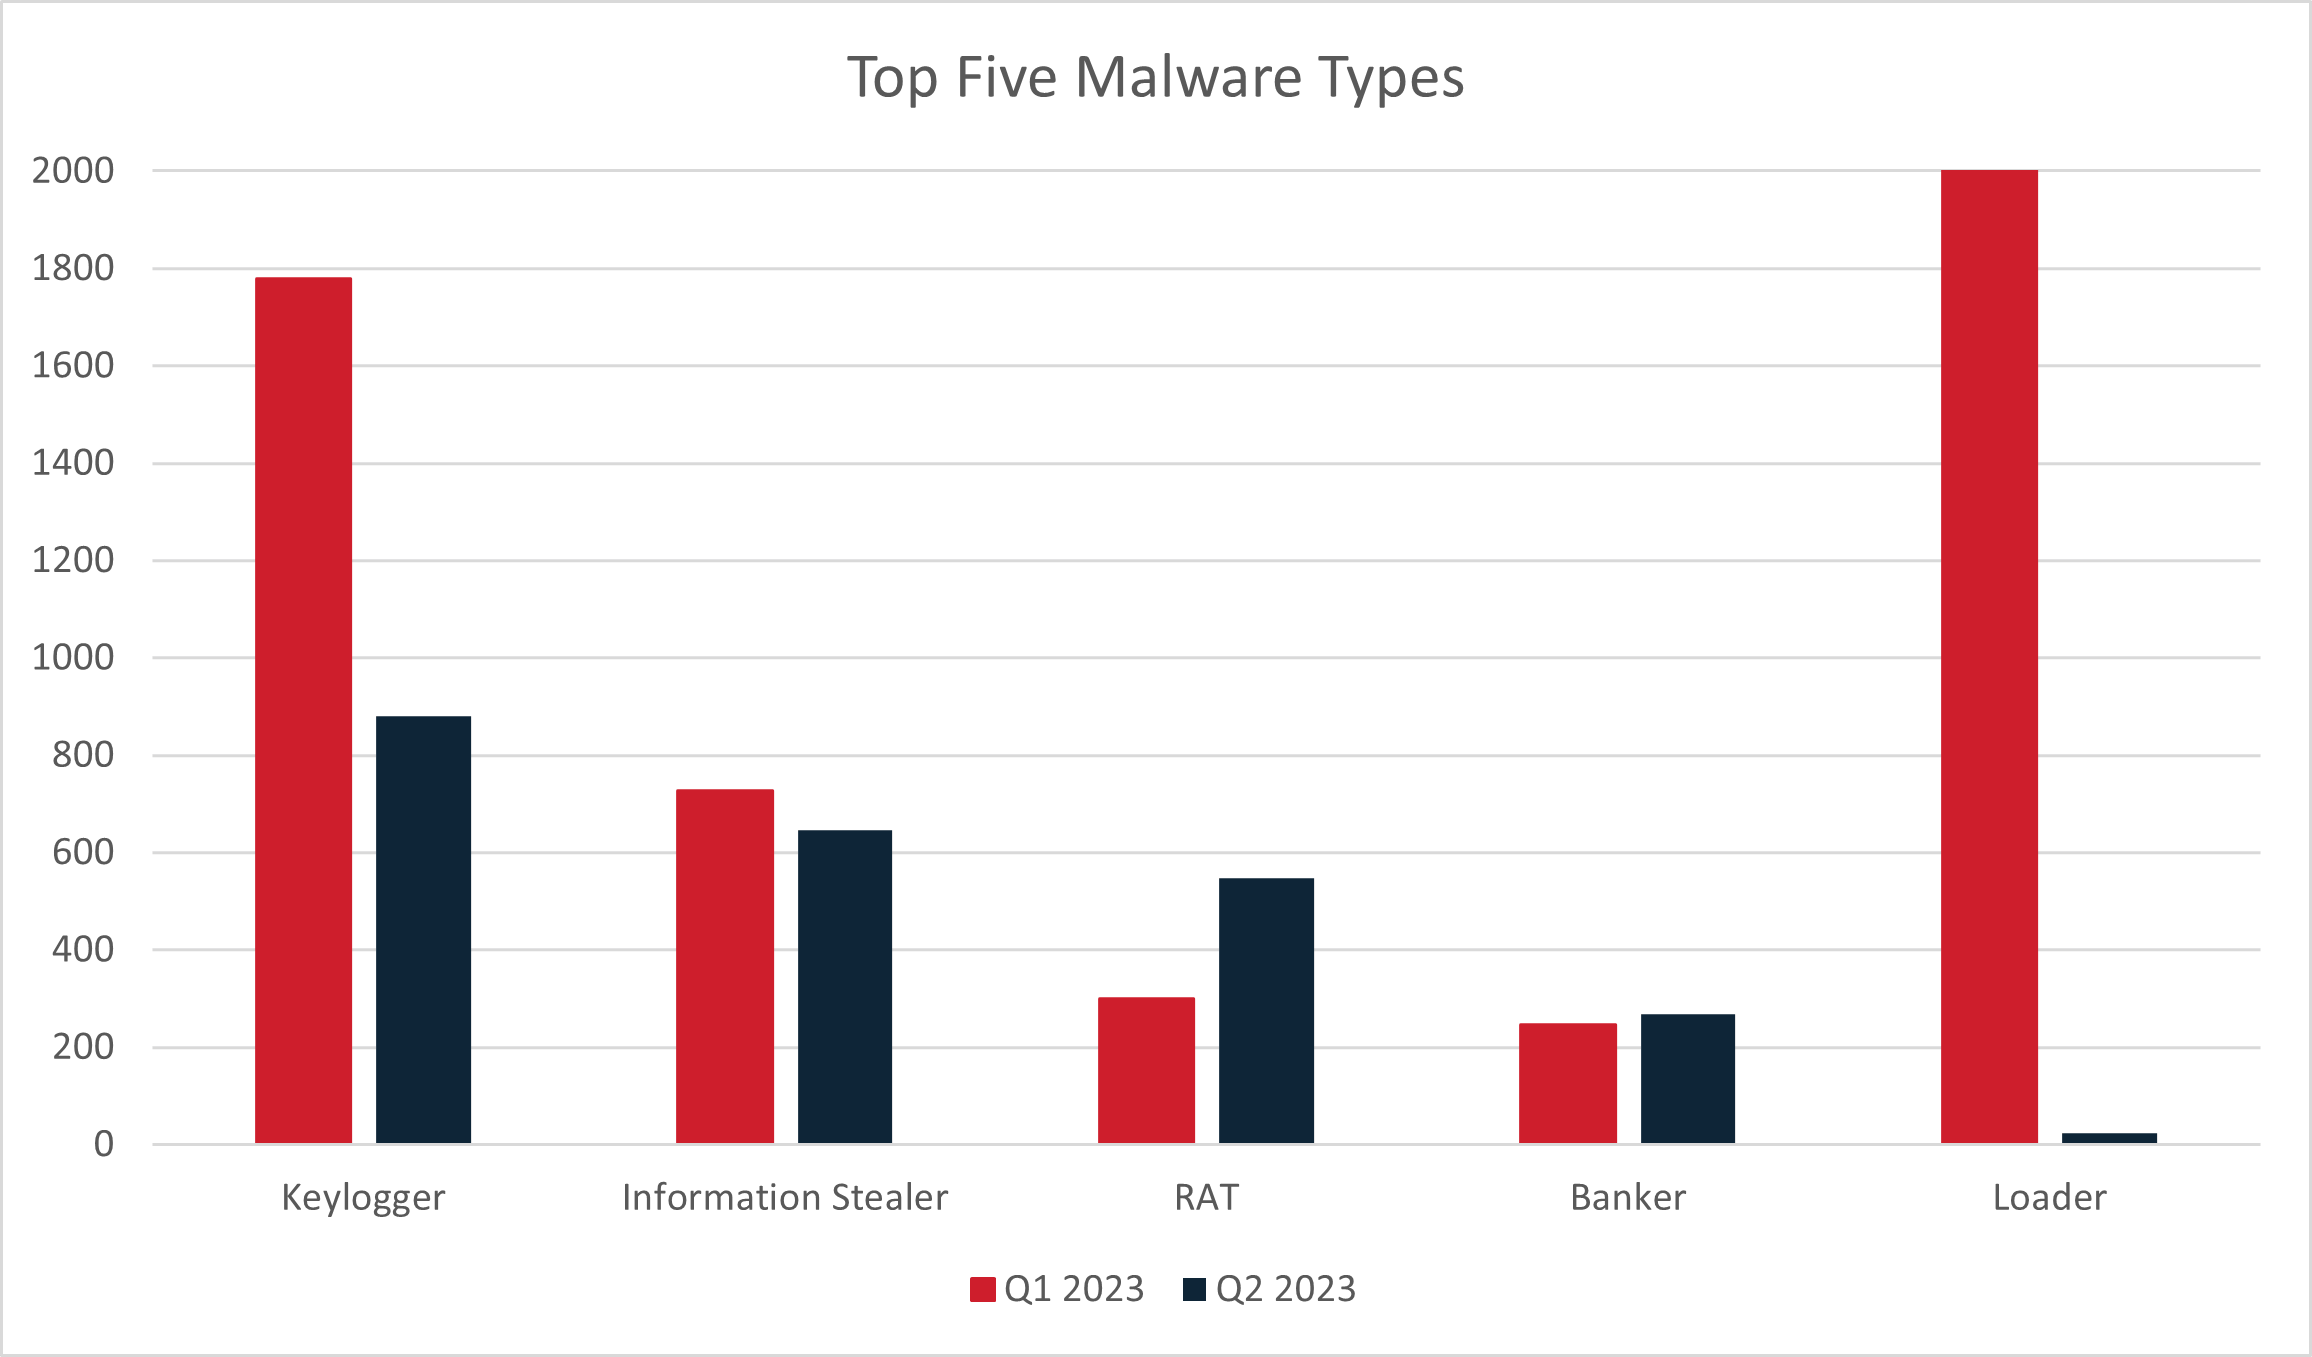 Figure 3: Top five malware types in Q1 and Q2 2023, by volume of emails. The maximum value for this chart has been capped and does not show the full proportion of the Loader malware type from Q1.